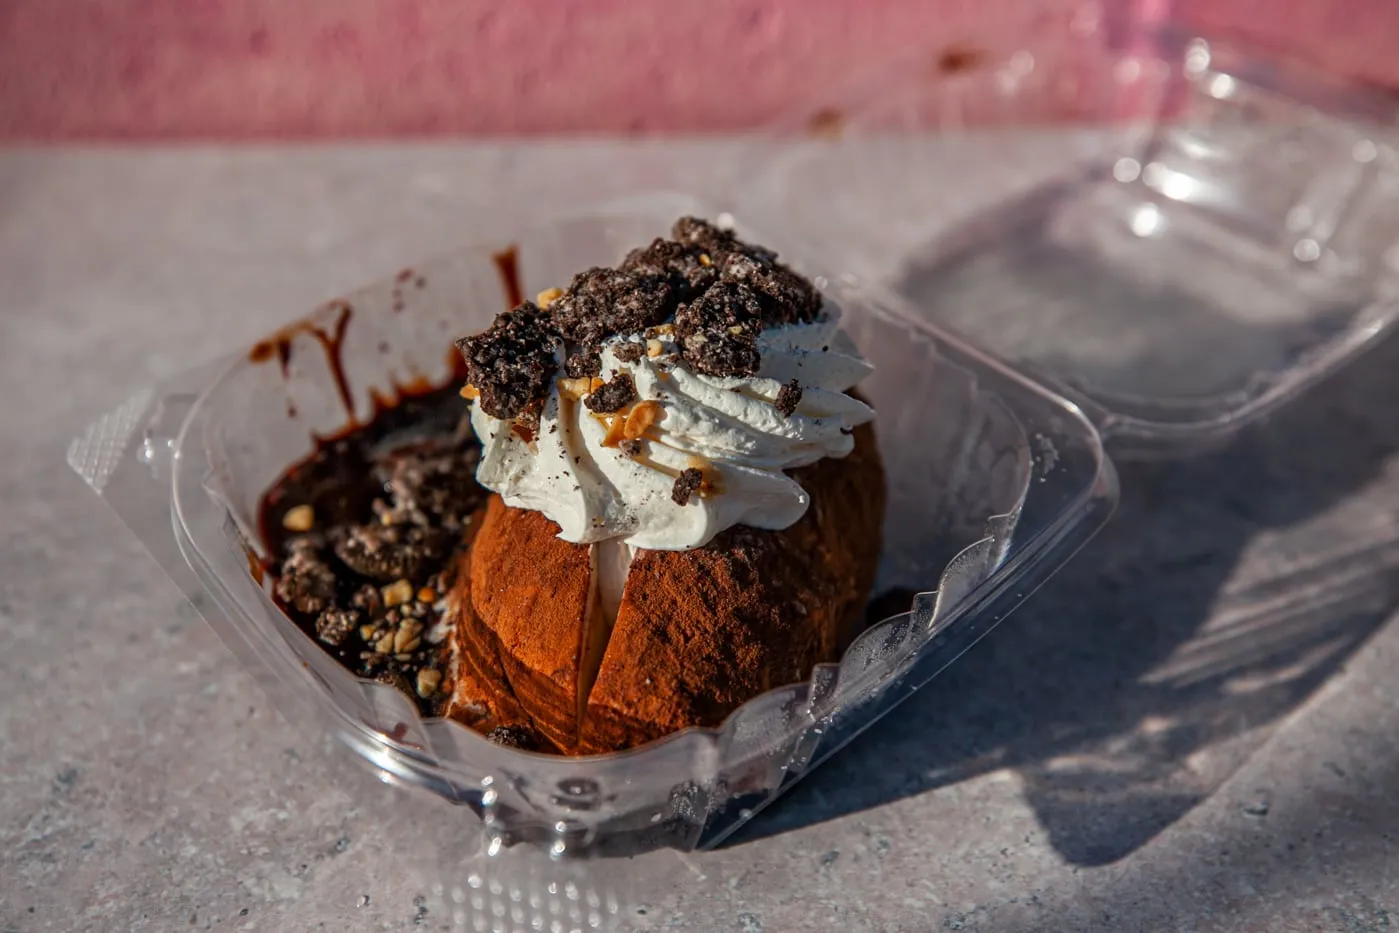 Idaho Potato Ice Cream at Westside Drive In in Boise, Idaho - ice cream sundae shaped like an Idaho baked potato featured on Diners, Drive Ins, and Dives.